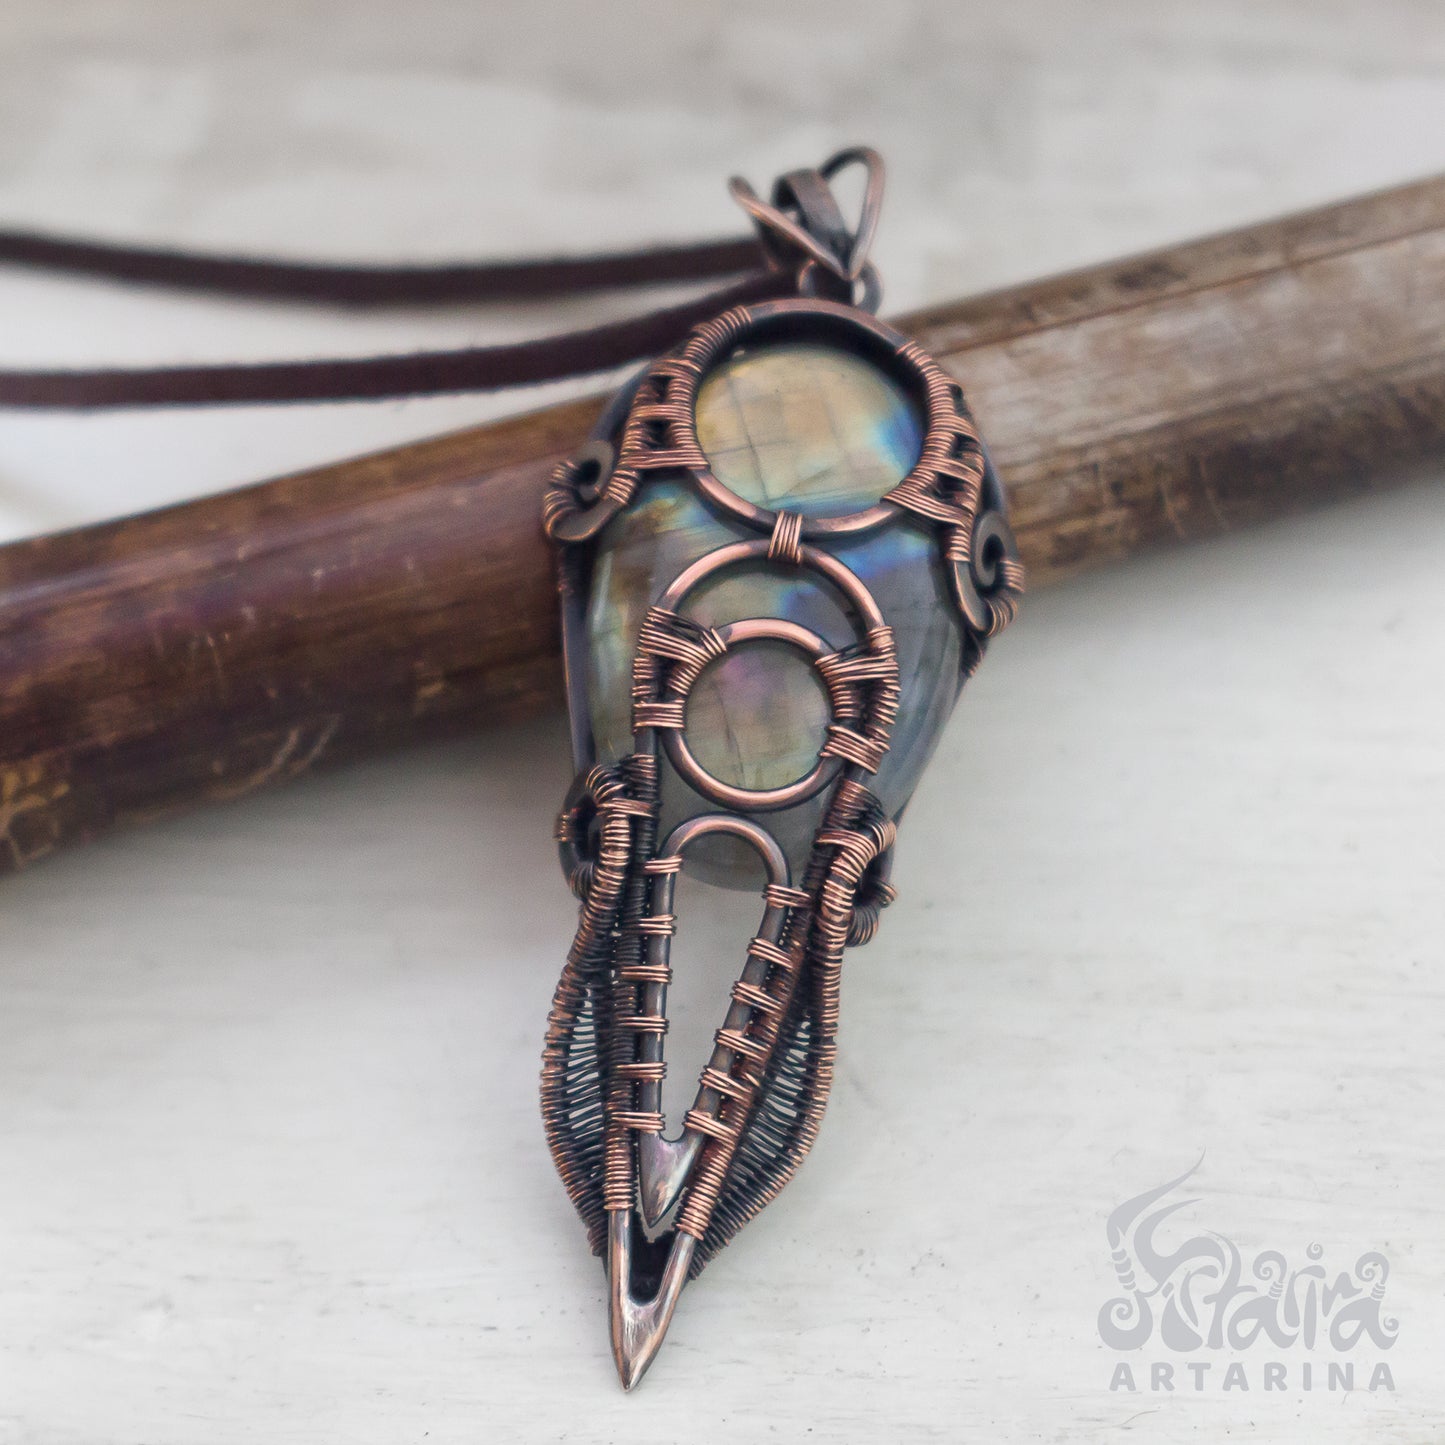 Unique pendant crafted from antiqued copper wire, showcasing a shiny labradorite stone with natural and spiritual allure. pic 2